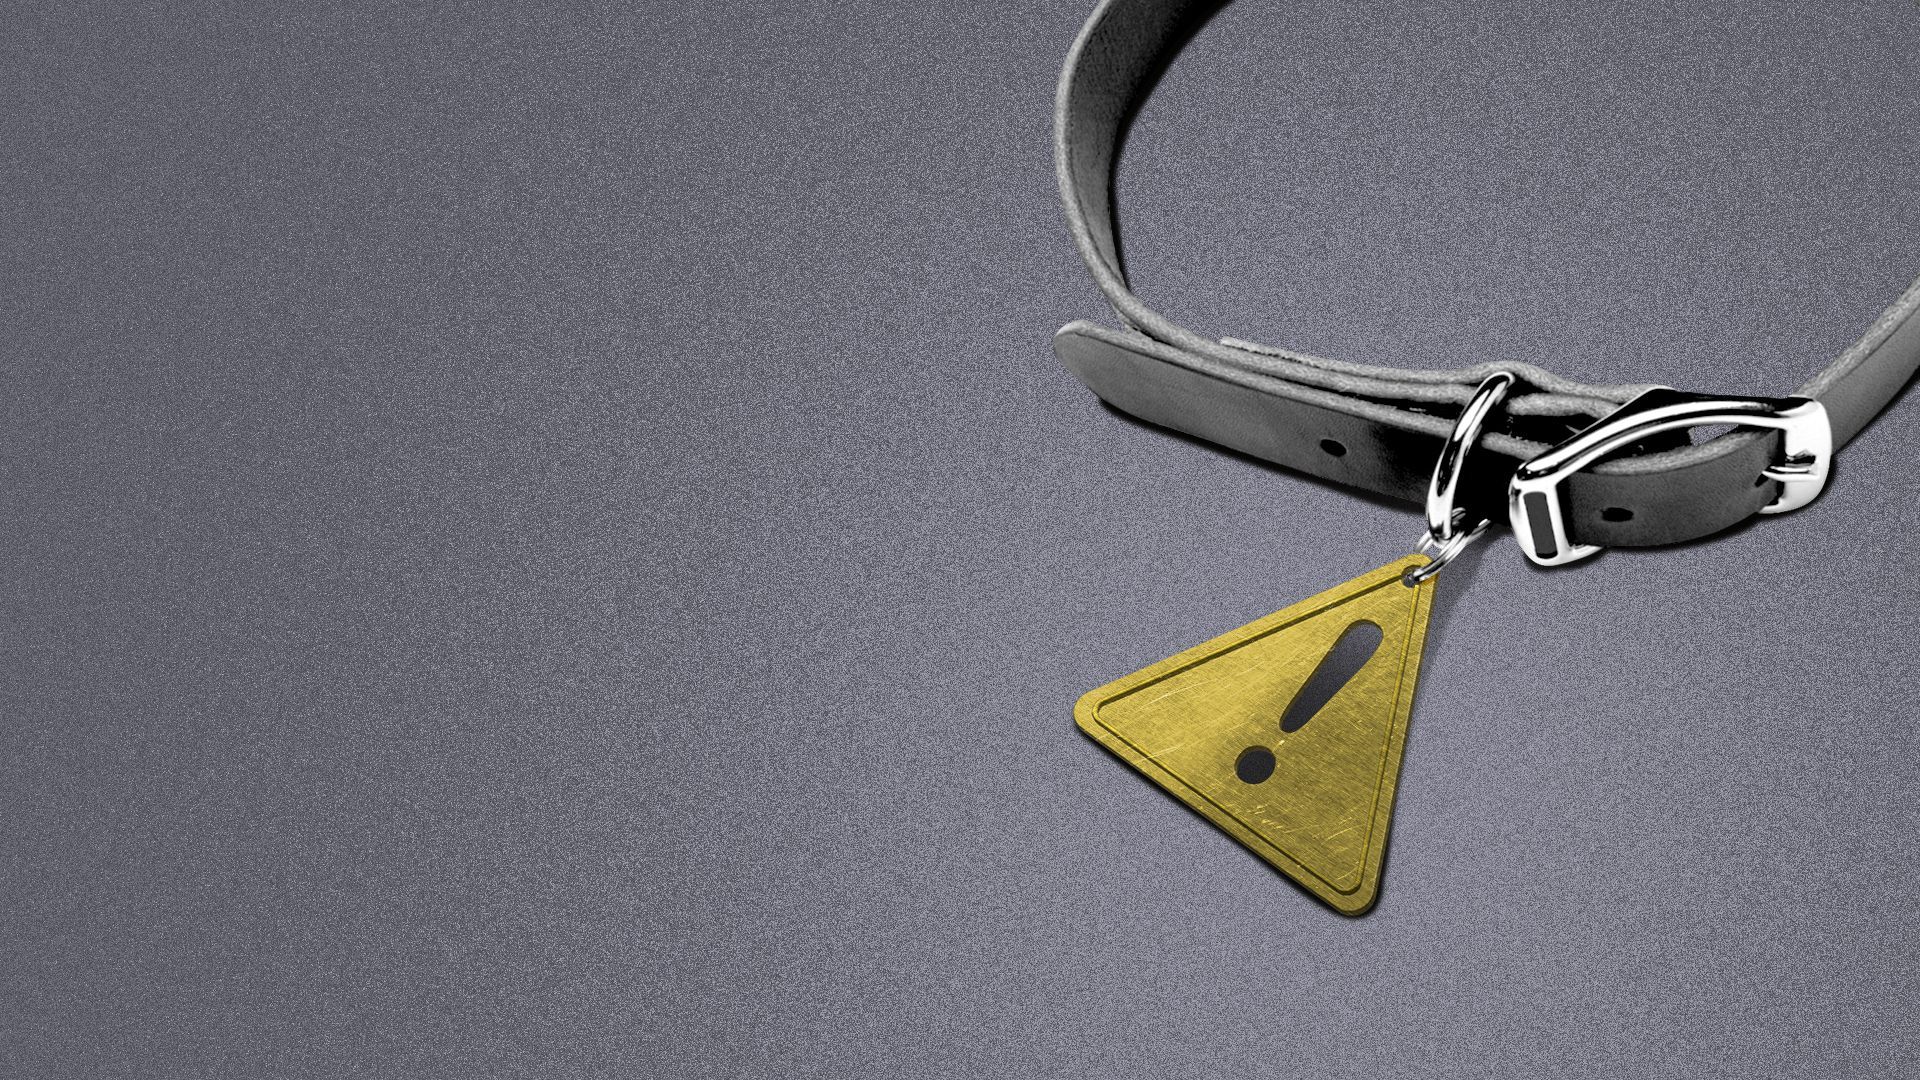 Illustration of a dog collar with a metal pendant in the shape of an emergency symbol with an exclamation point.